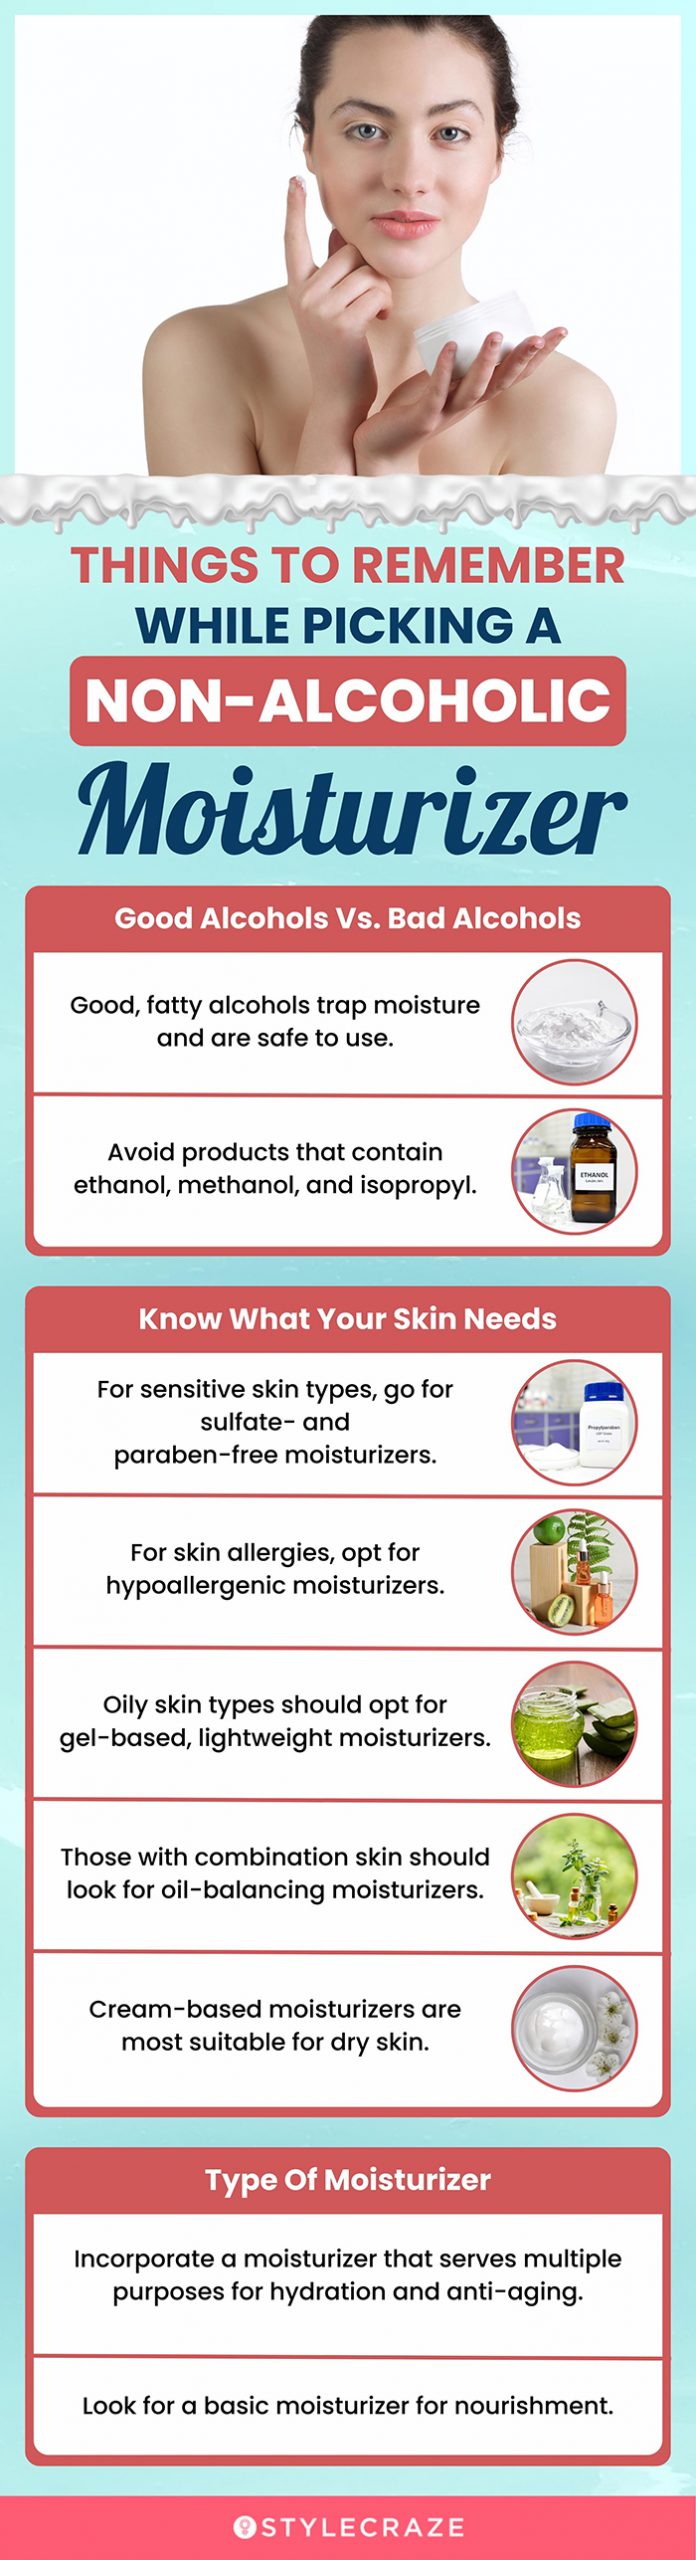 Things To Remember While Picking A Non-Alcoholic Moisturizer (infographic)